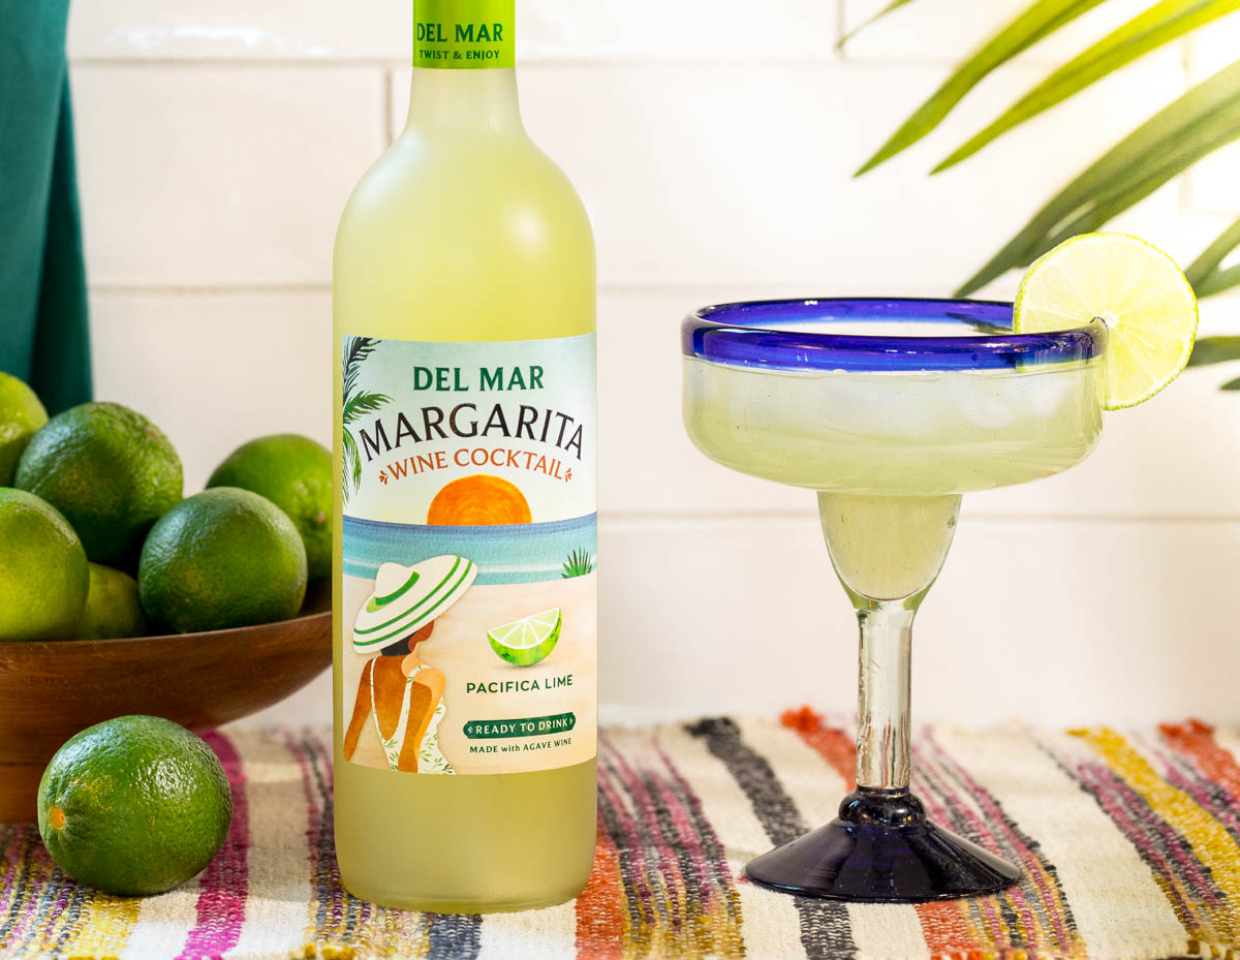 Bottle of Del Mar margarita wine cocktail on a counter with limes next to a margarita glass.